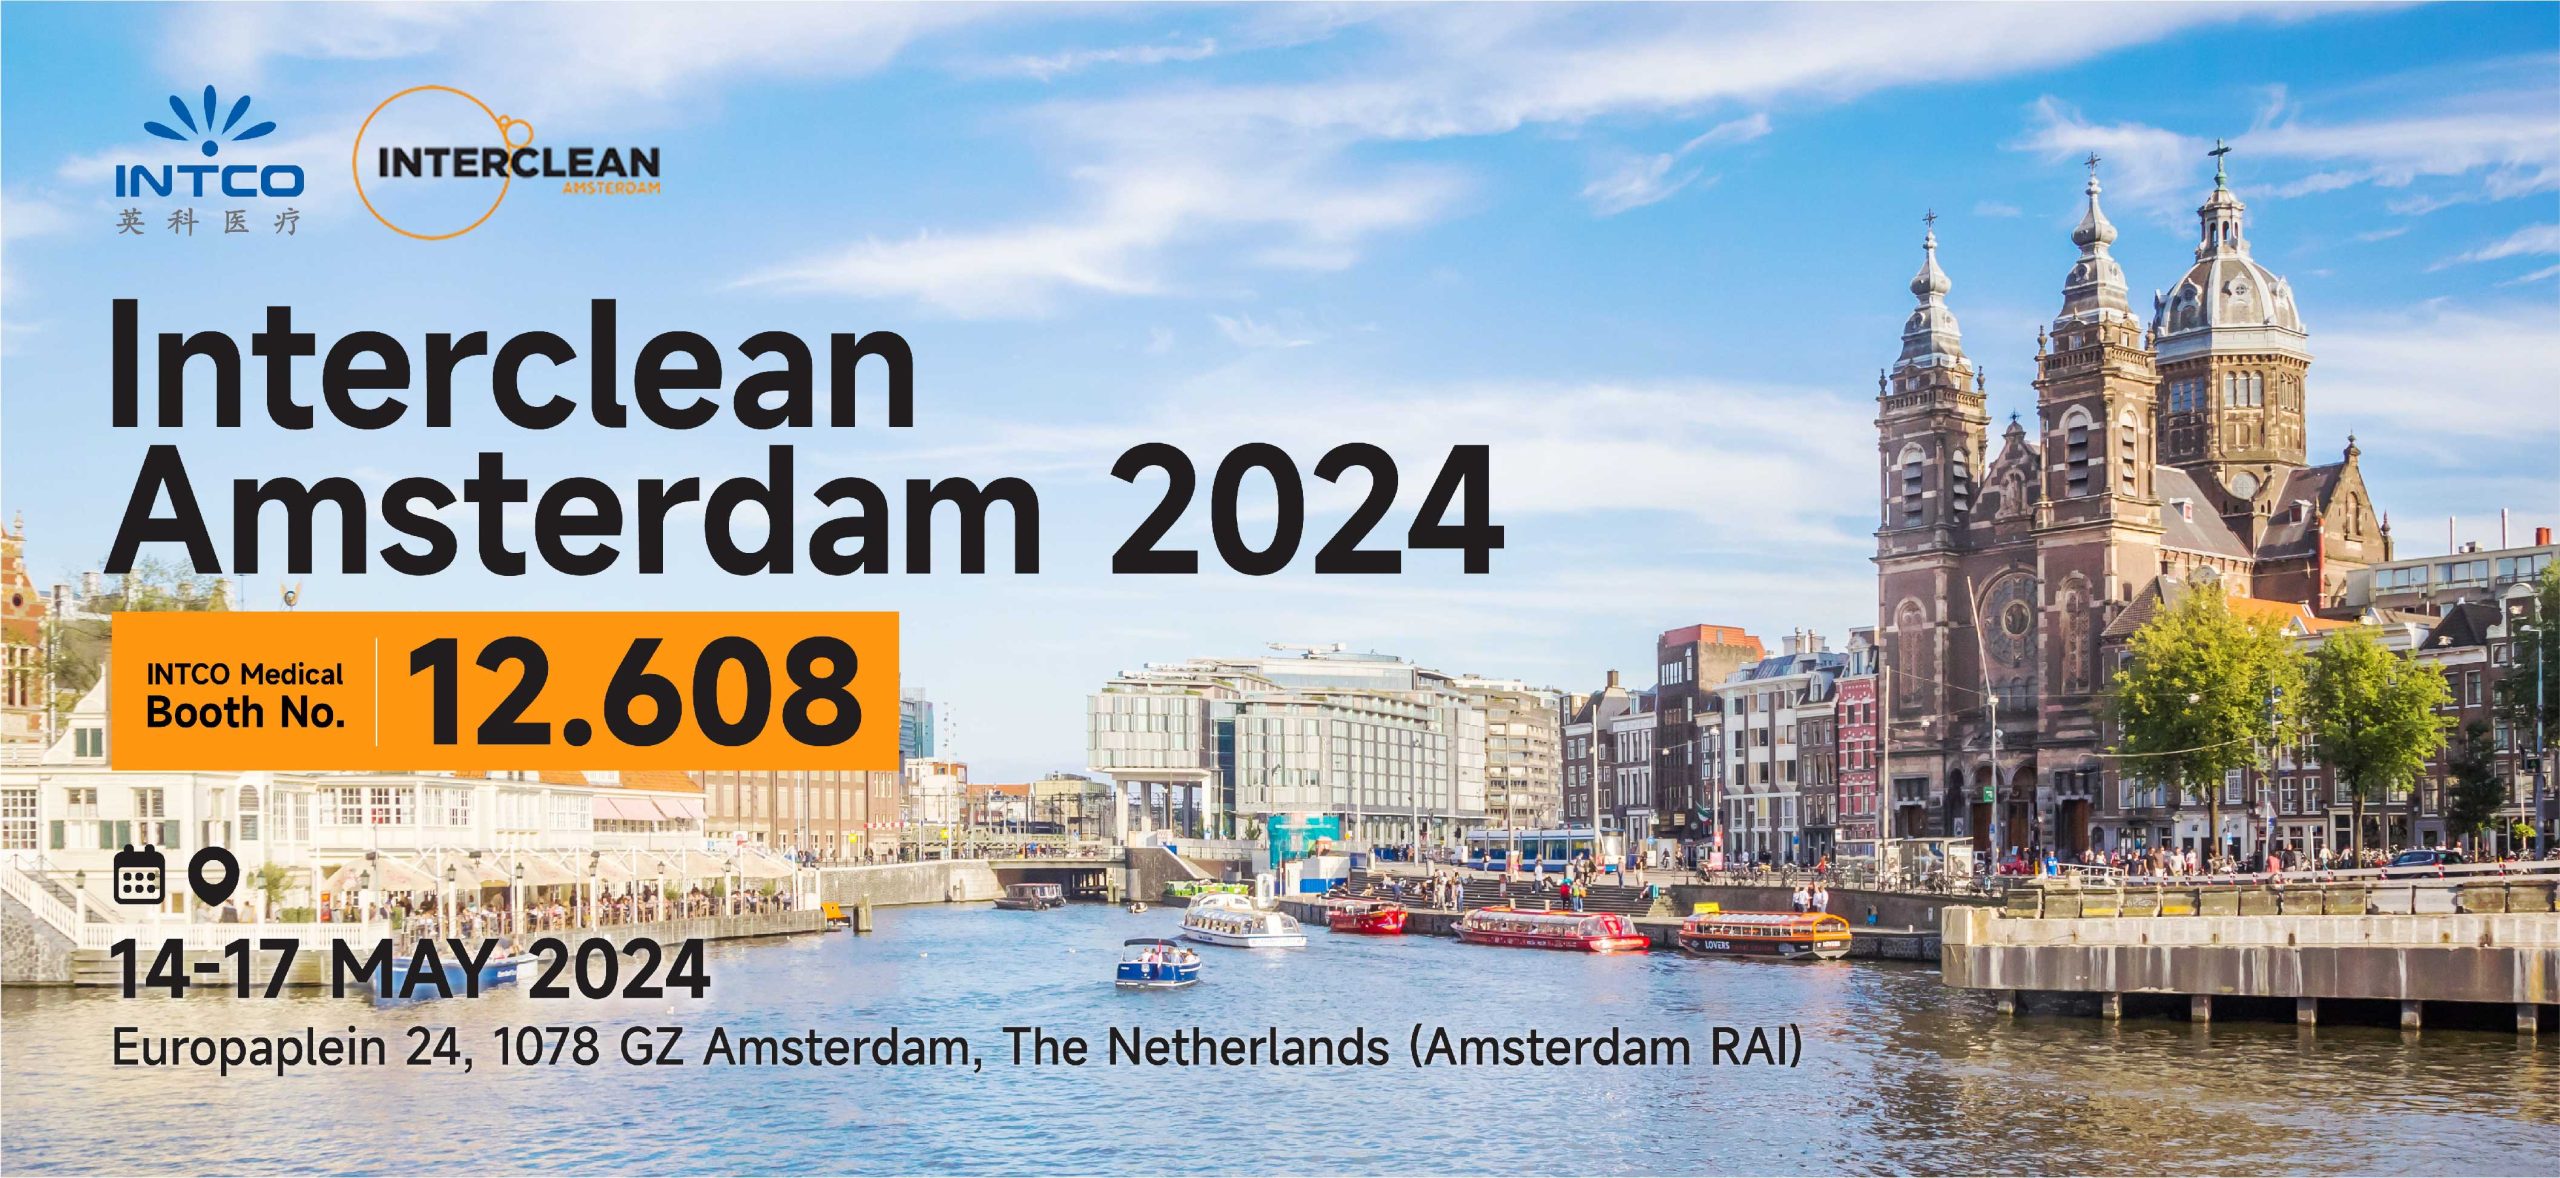 INTCO Medial attends the Interclean Amsterdam 2024